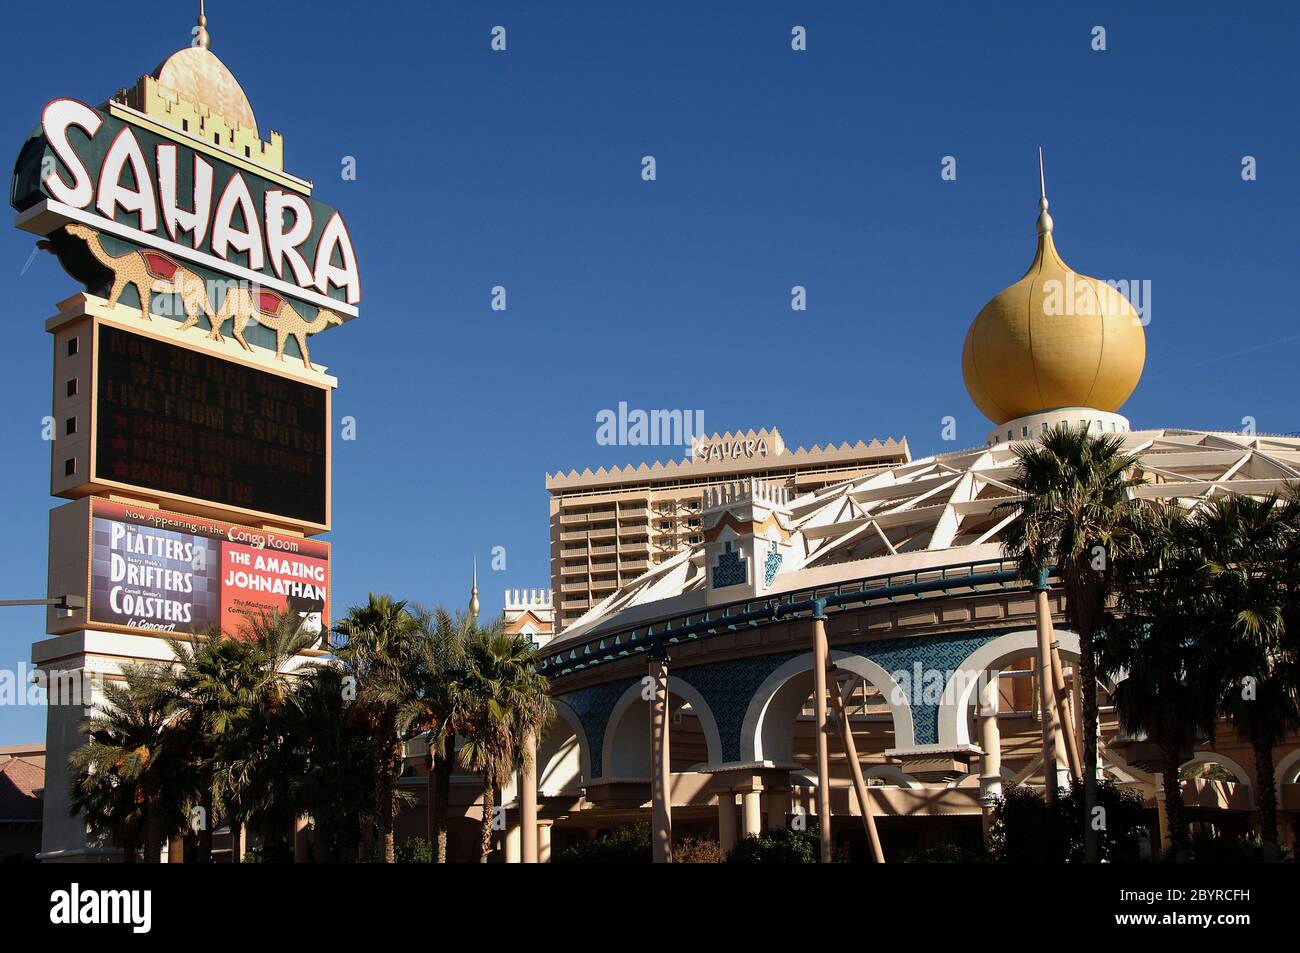 Sahara Hotel Las Vegas 481 Hotel and most important places in Las Vegas The most beautiful place in Las Vegas Stock Photo